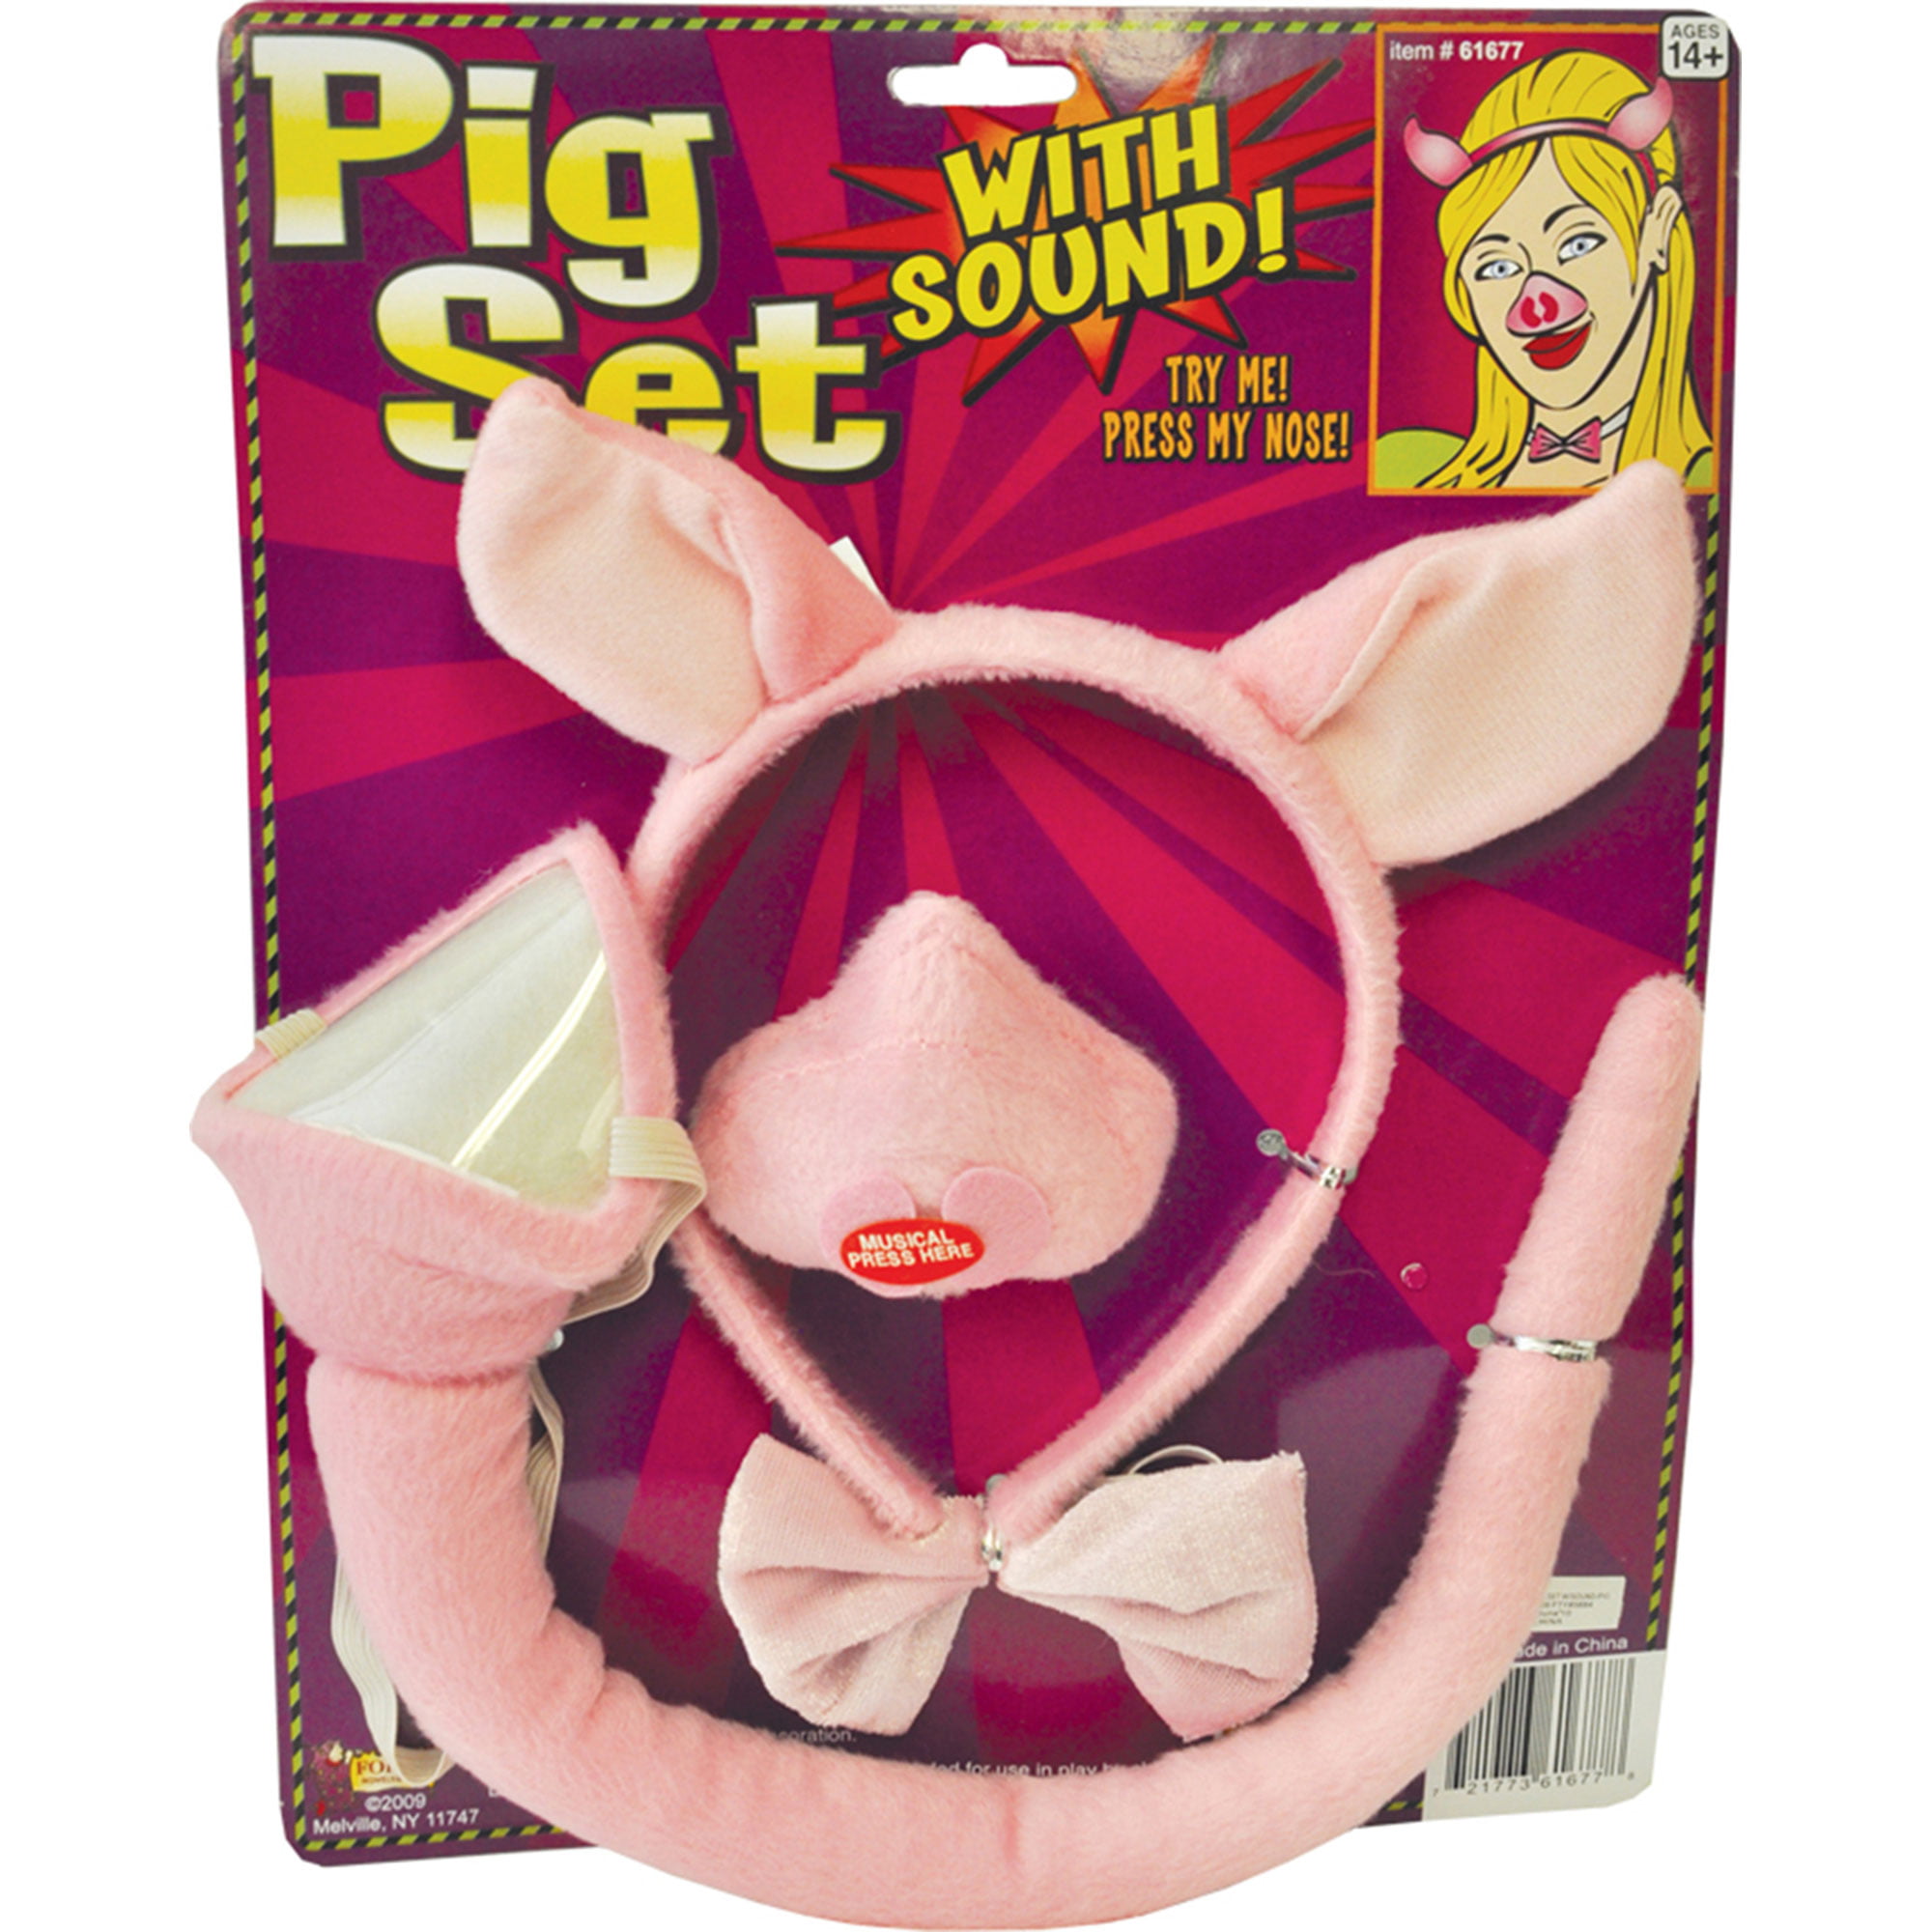 CHILD PIG WITH SOUND TAIL EARS NOSE COSUTME ACCESSORY SET FM61677 